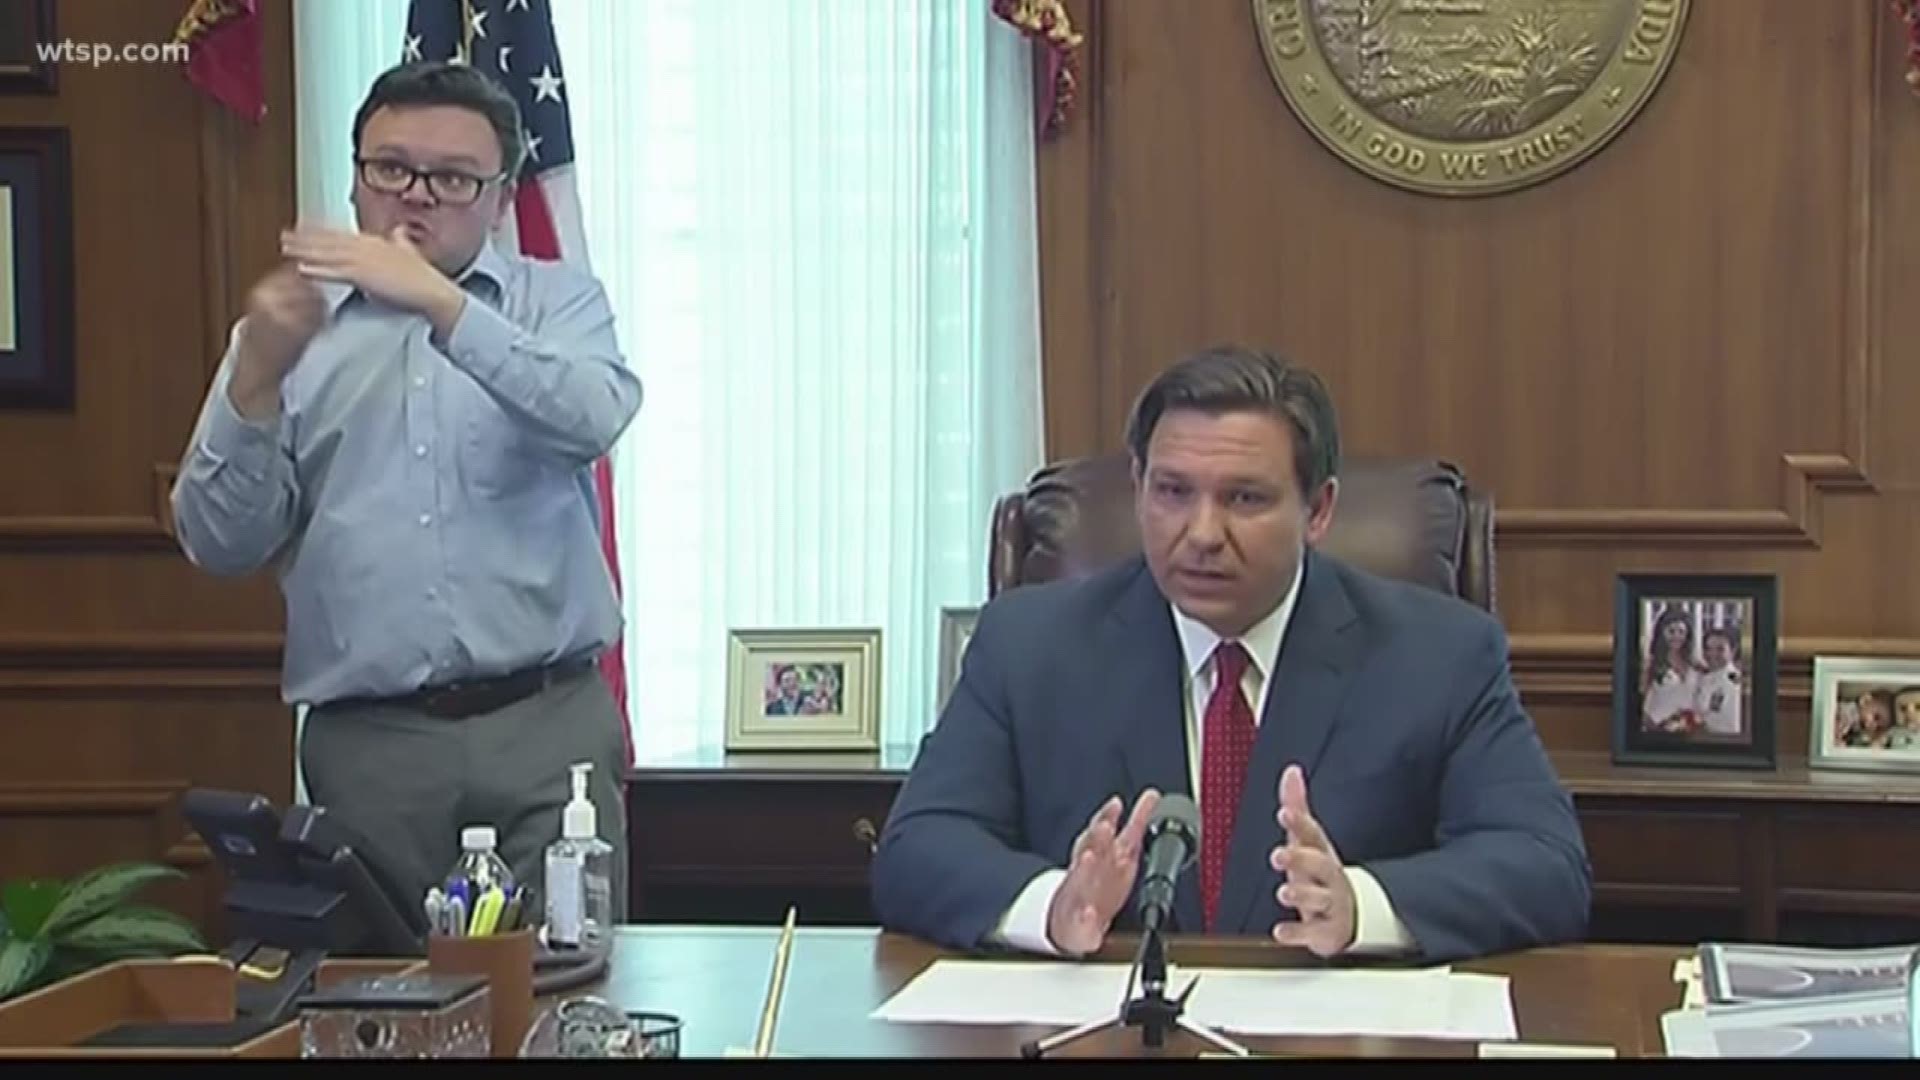 Florida Gov. Ron DeSantis announced Wednesday that he is issuing a statewide stay-at-home order to combat the spread of coronavirus.